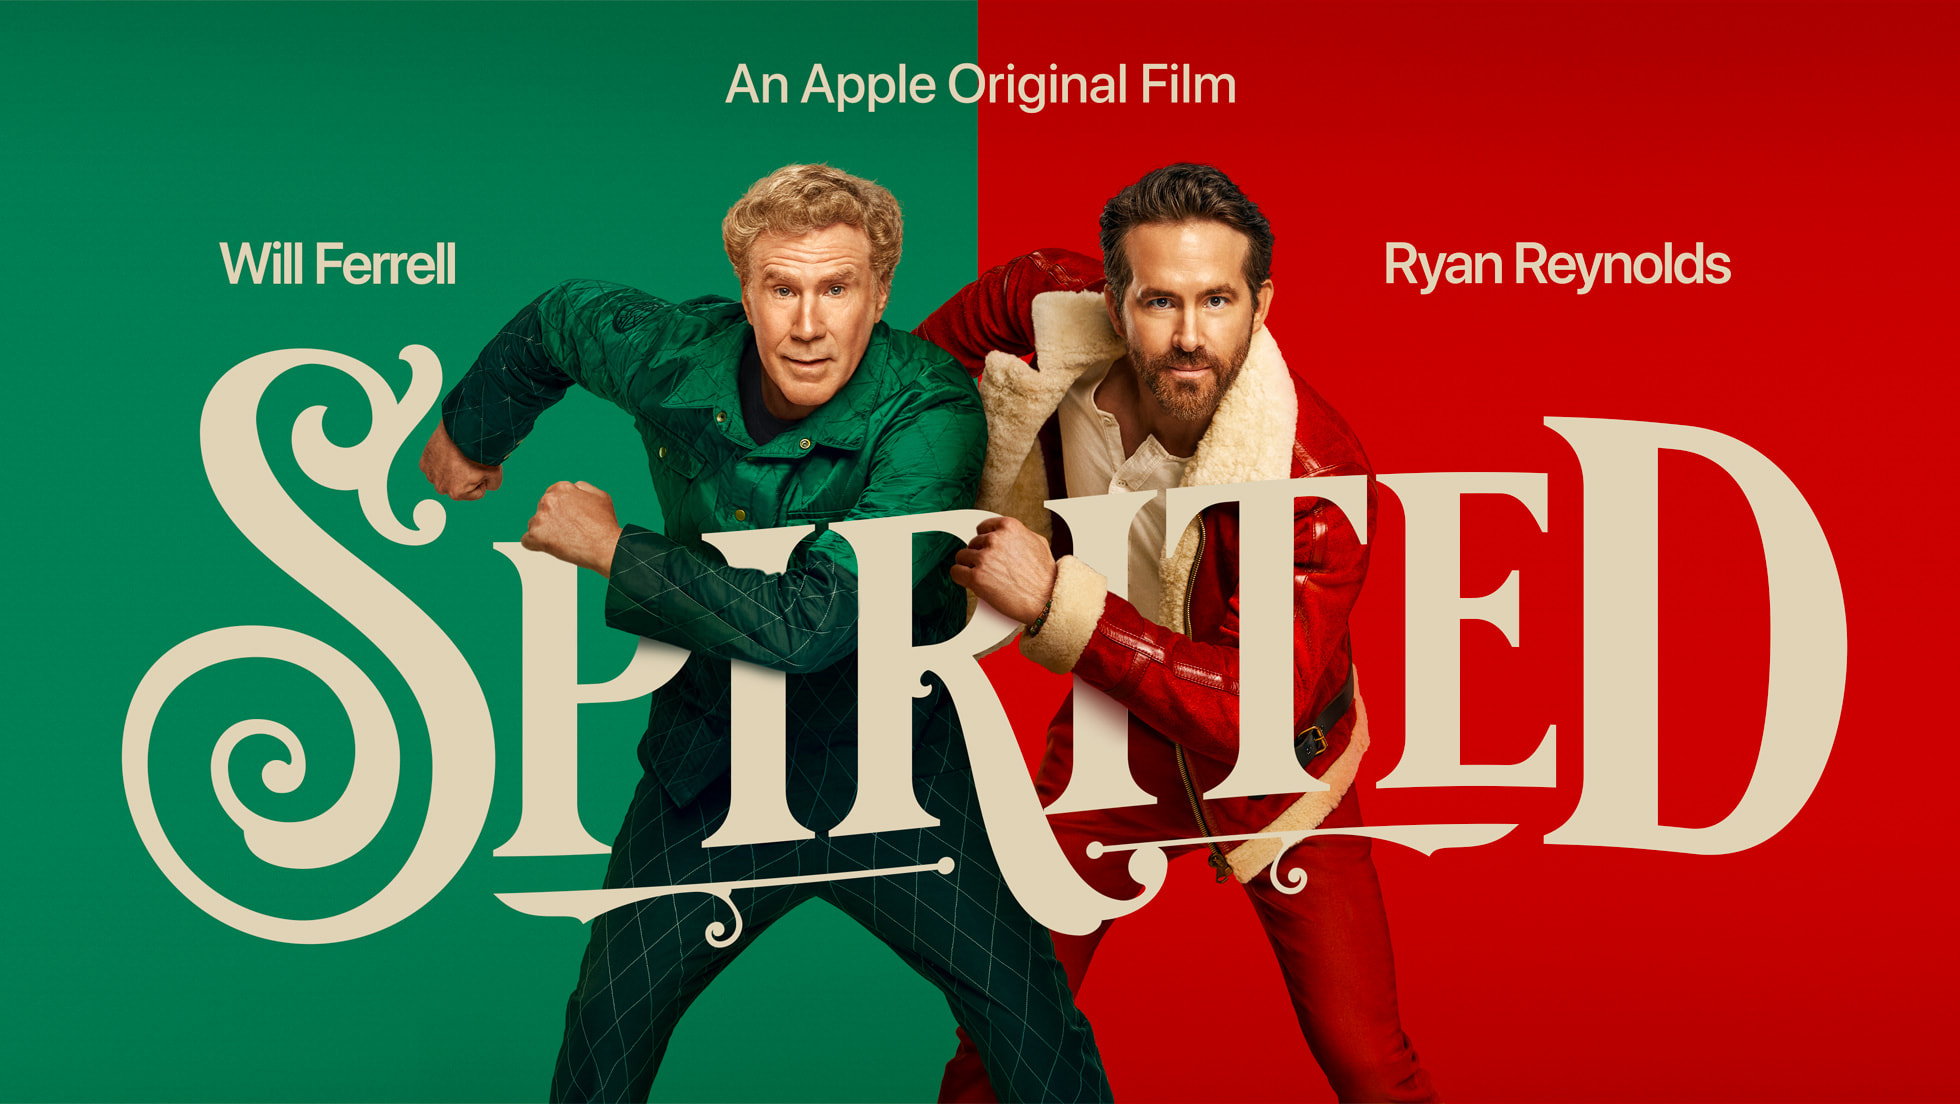 Apple Original Films’ global holiday hit “Spirited” to be re-released in theaters Nov. 24, 2023